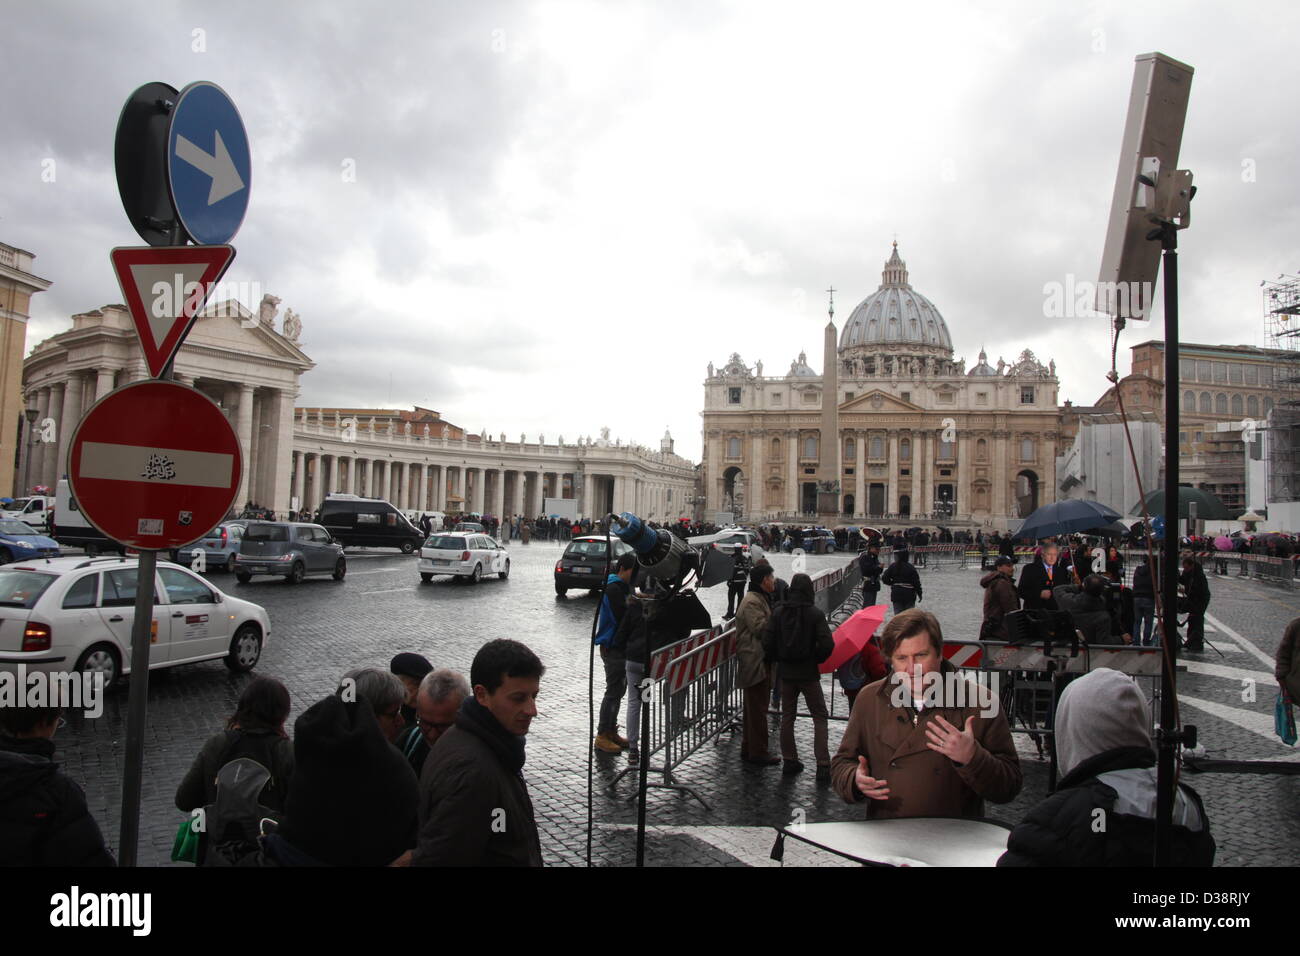 12 Feb 2013 The world's media at the Vatican City, Rome following the resignation announcement by Pope Benedict XVI Stock Photo